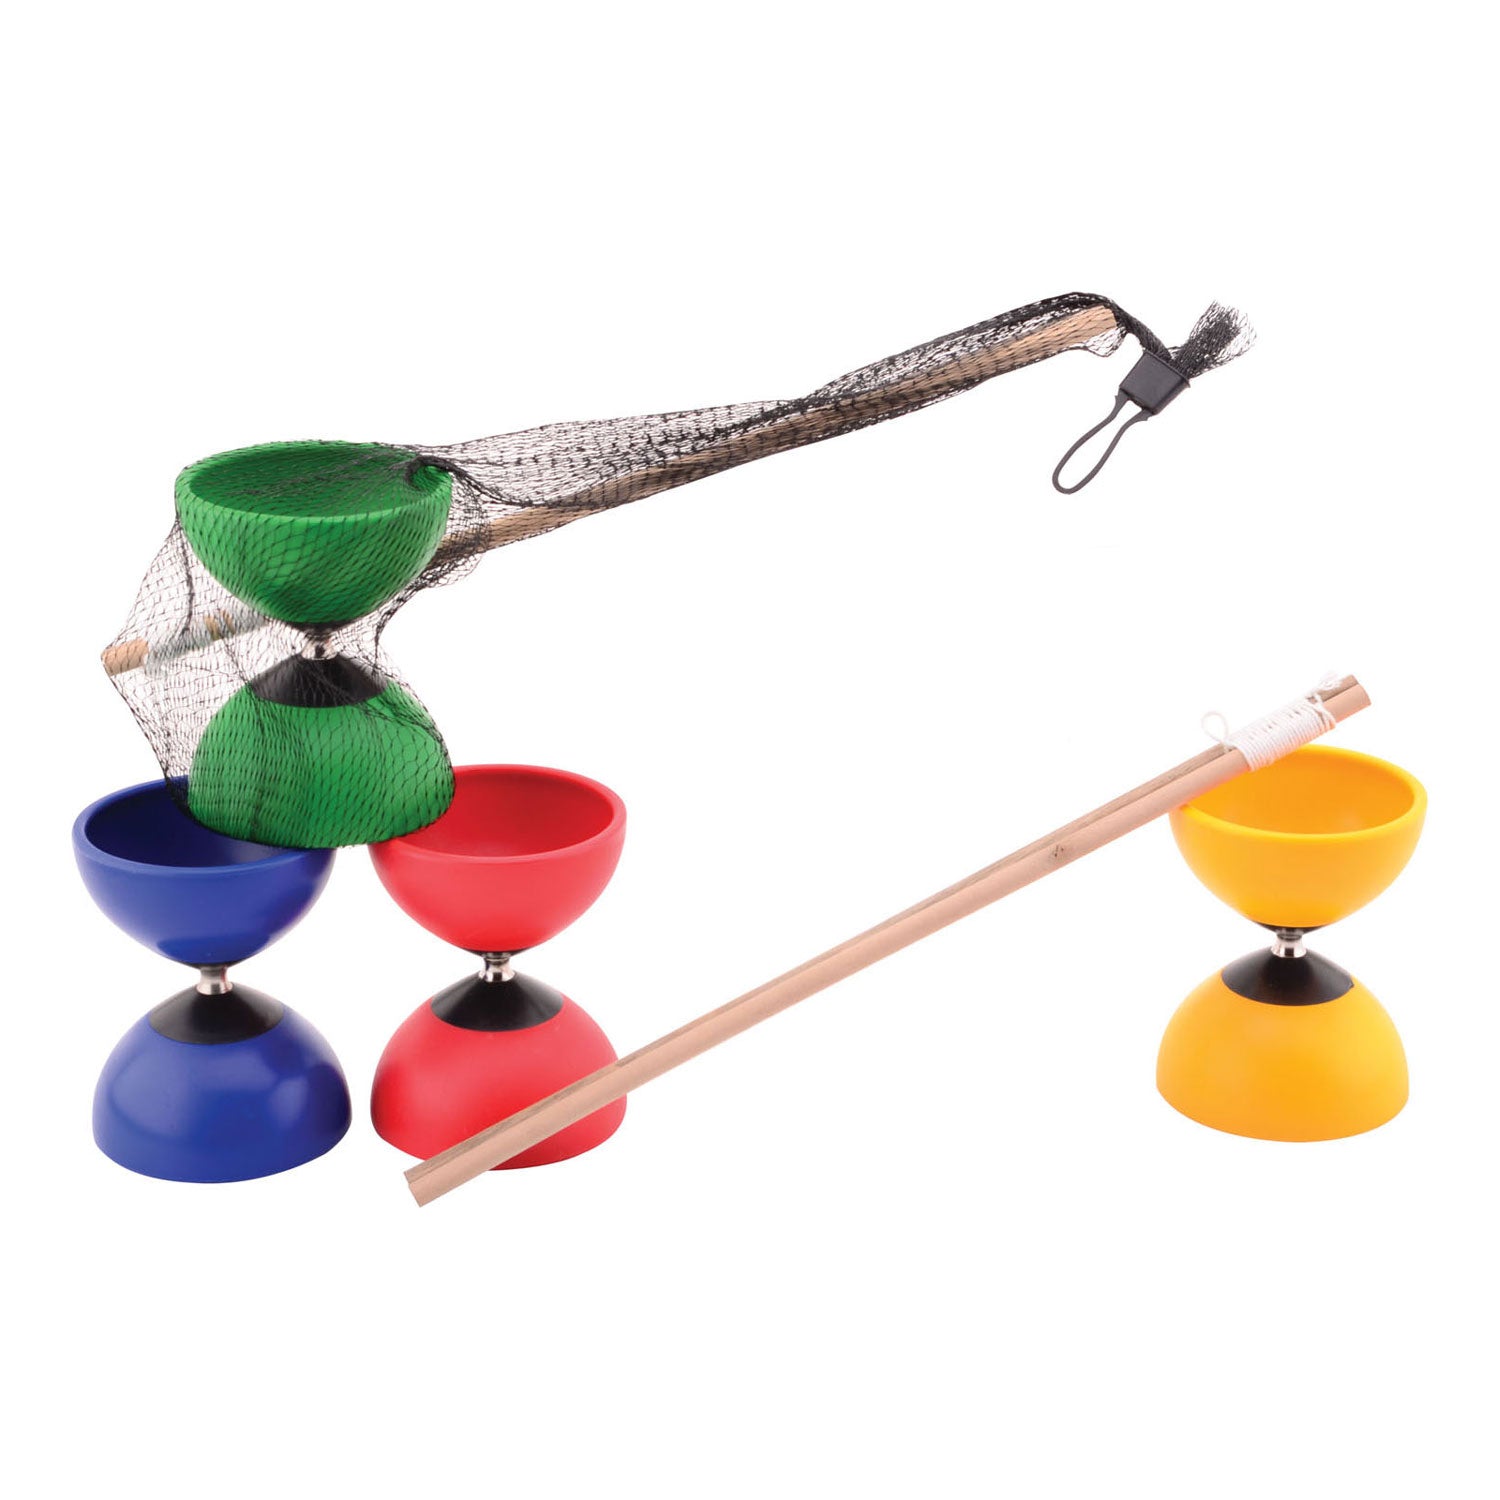 outdoorfun Outdoor Fun Diabolo Colored with Wooden Sticks (Assorted)